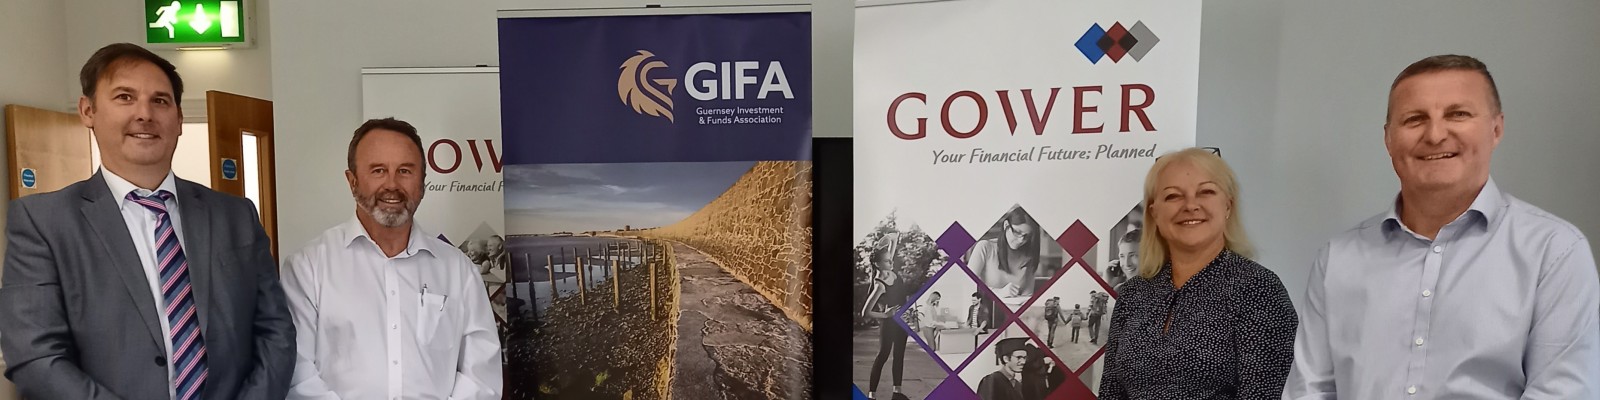 Gower presents to young members of GIFA about managing their money